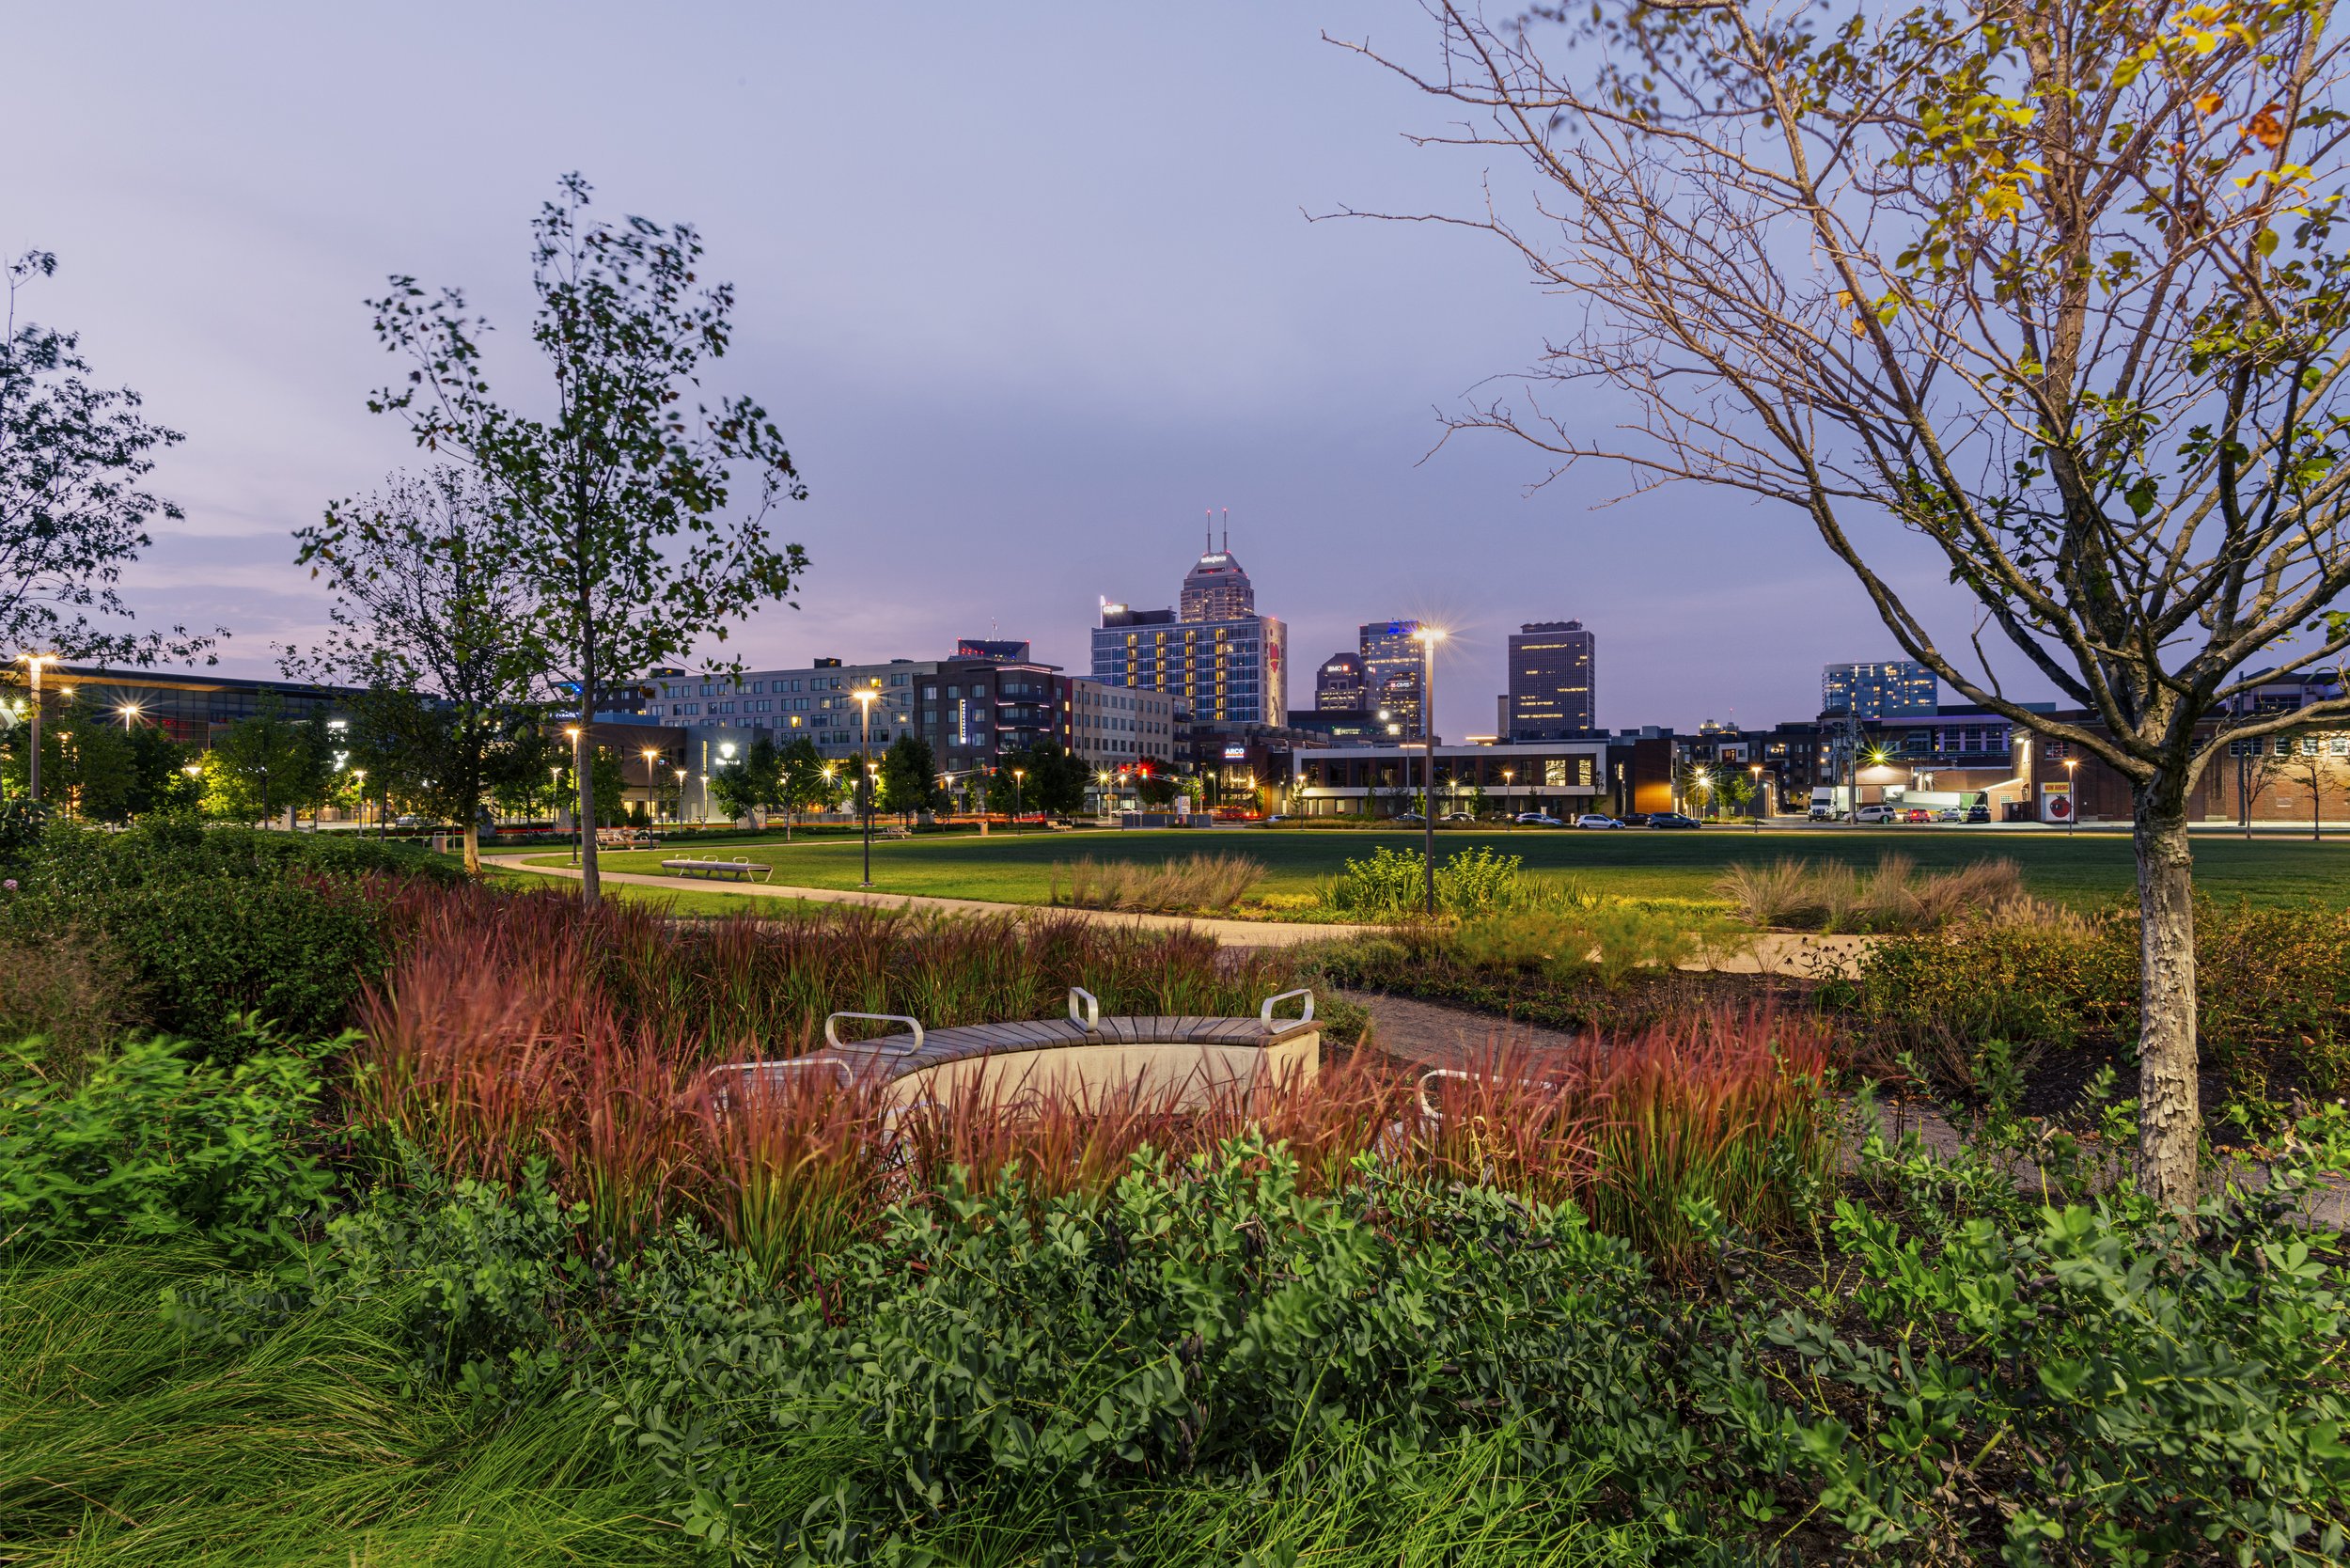 Community photography showing a park at twilight in front of the city of Indianapolis.